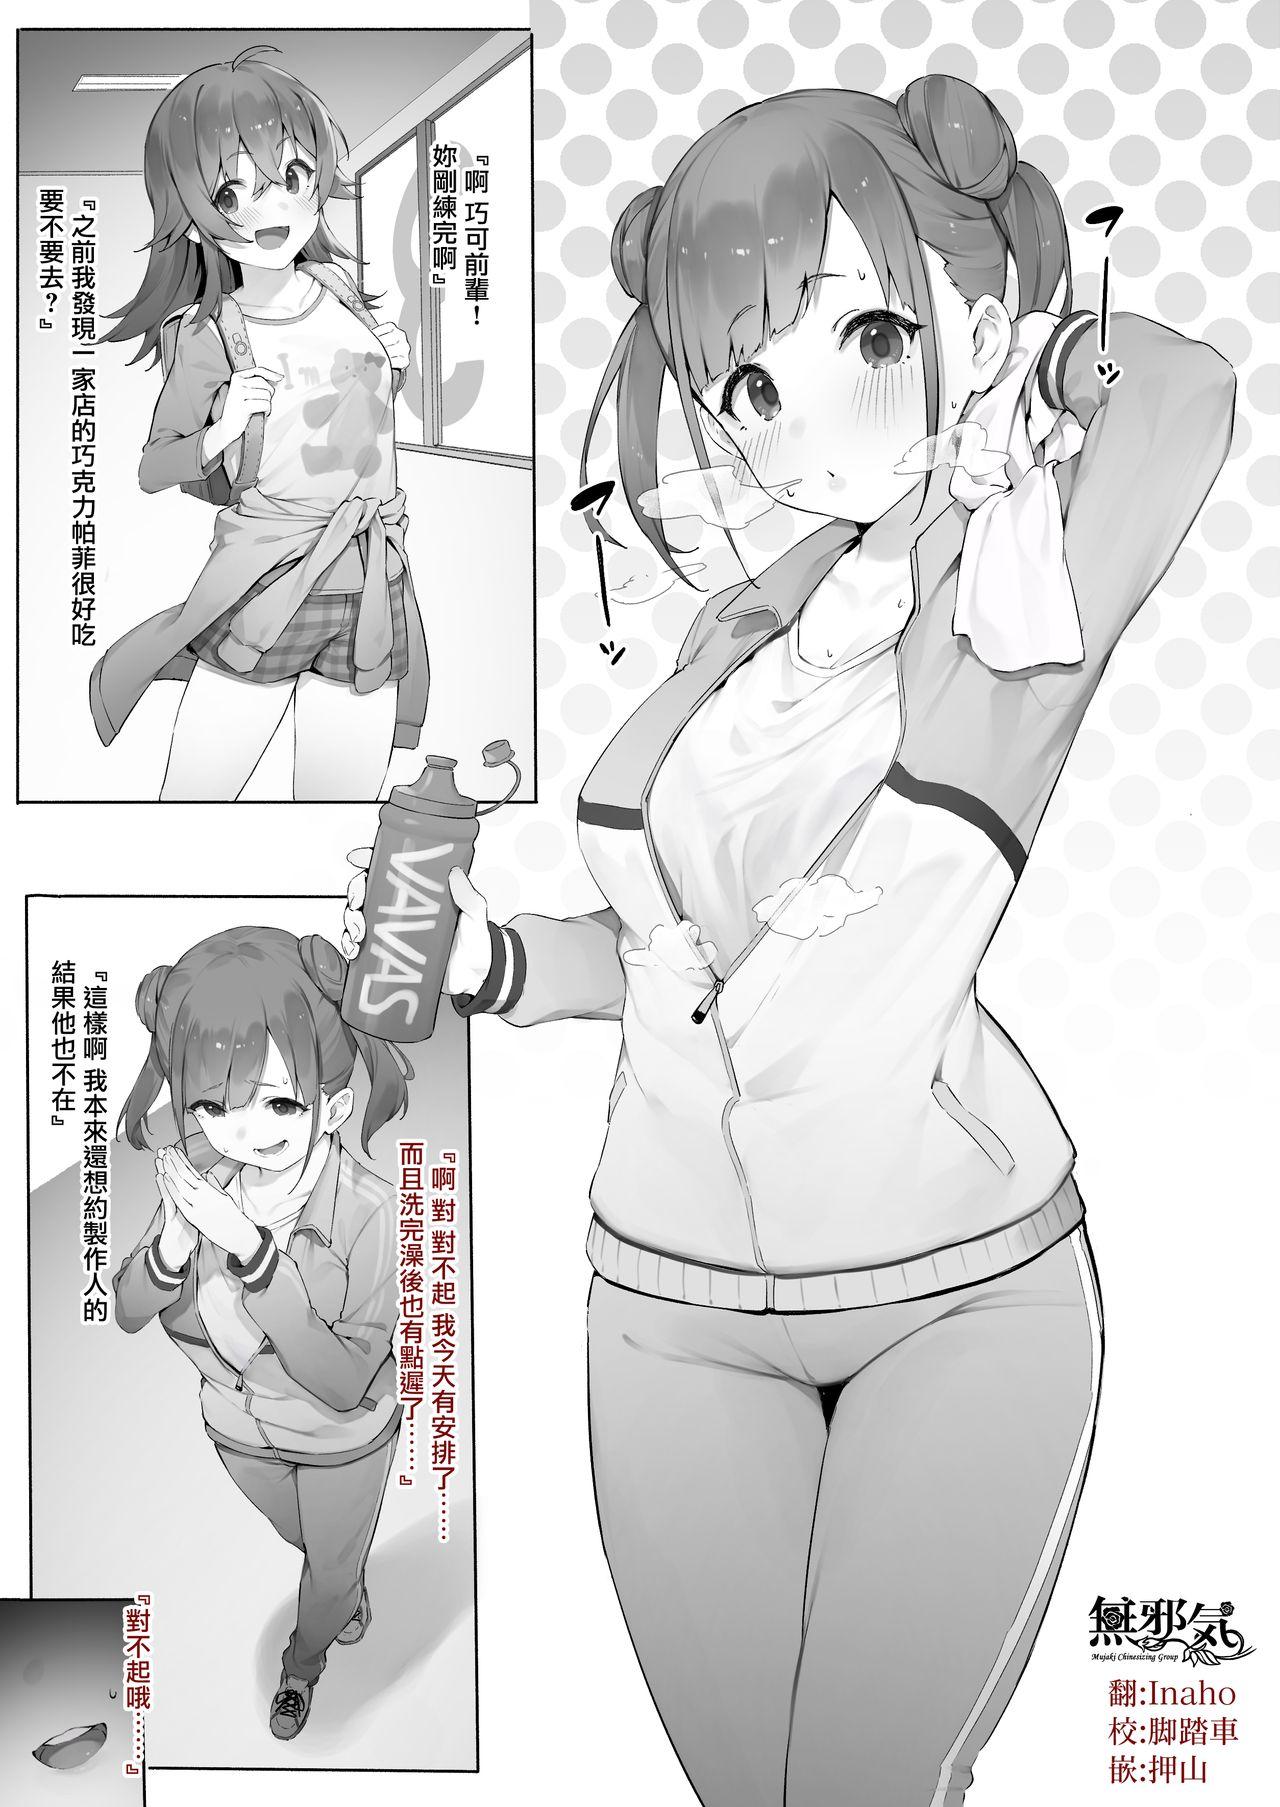 Yanks Featured Sonoda Zoku - The idolmaster Tit - Picture 1